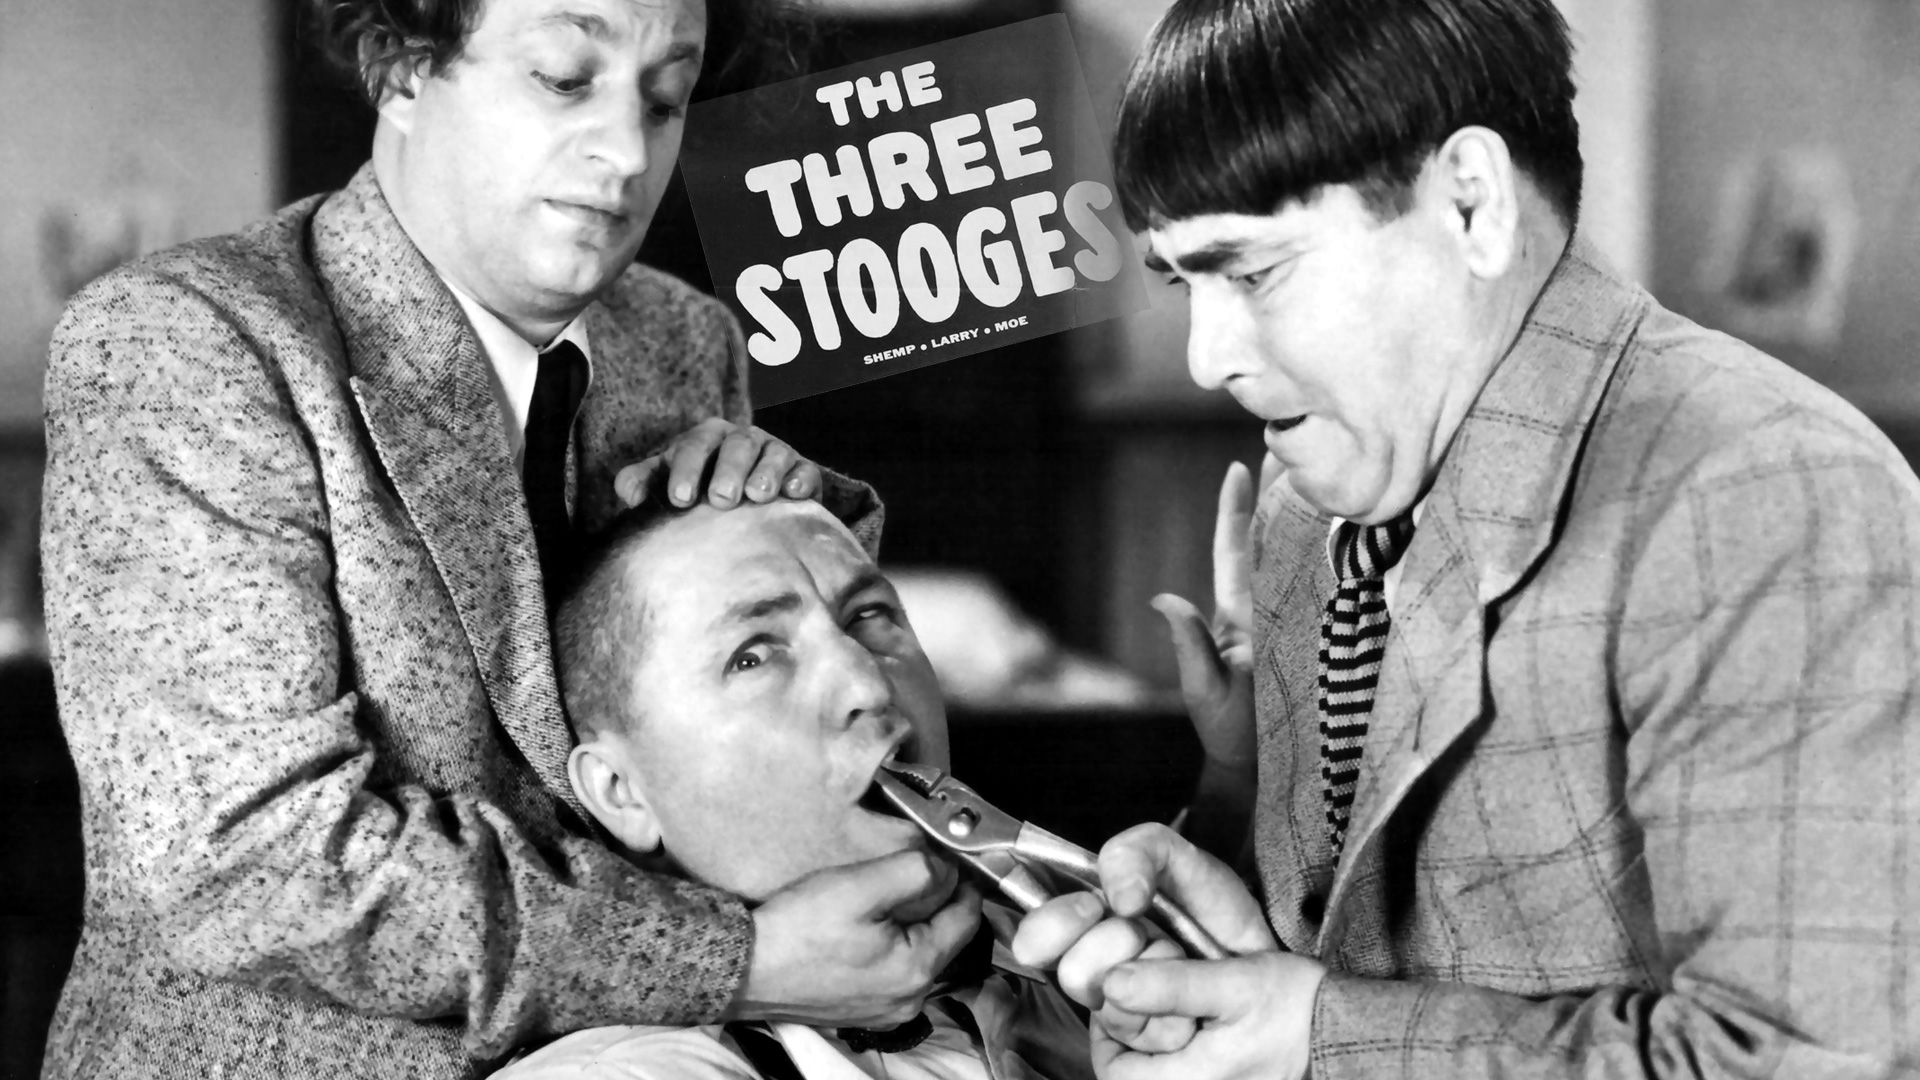 three stooges full episodes free online